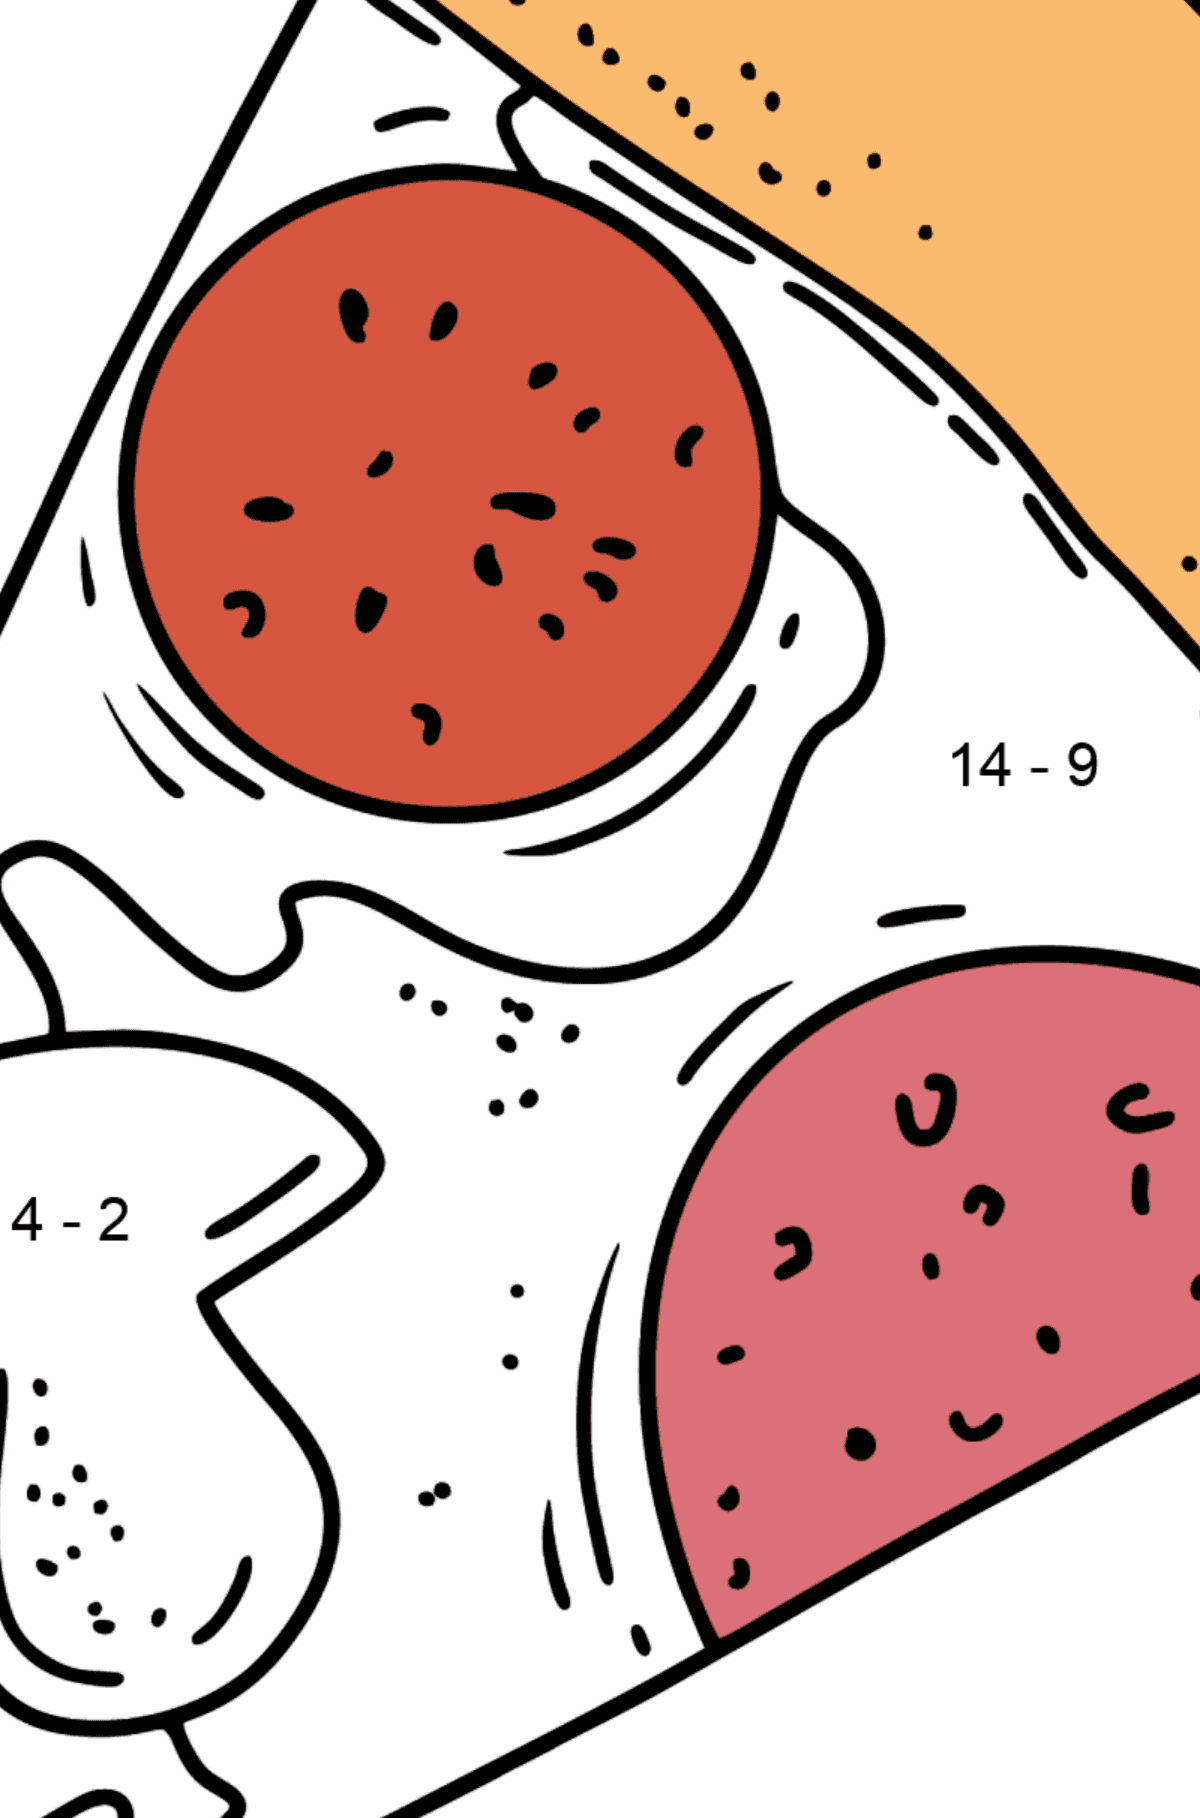 Salami Pizza and Mushrooms coloring page - Math Coloring - Subtraction for Kids